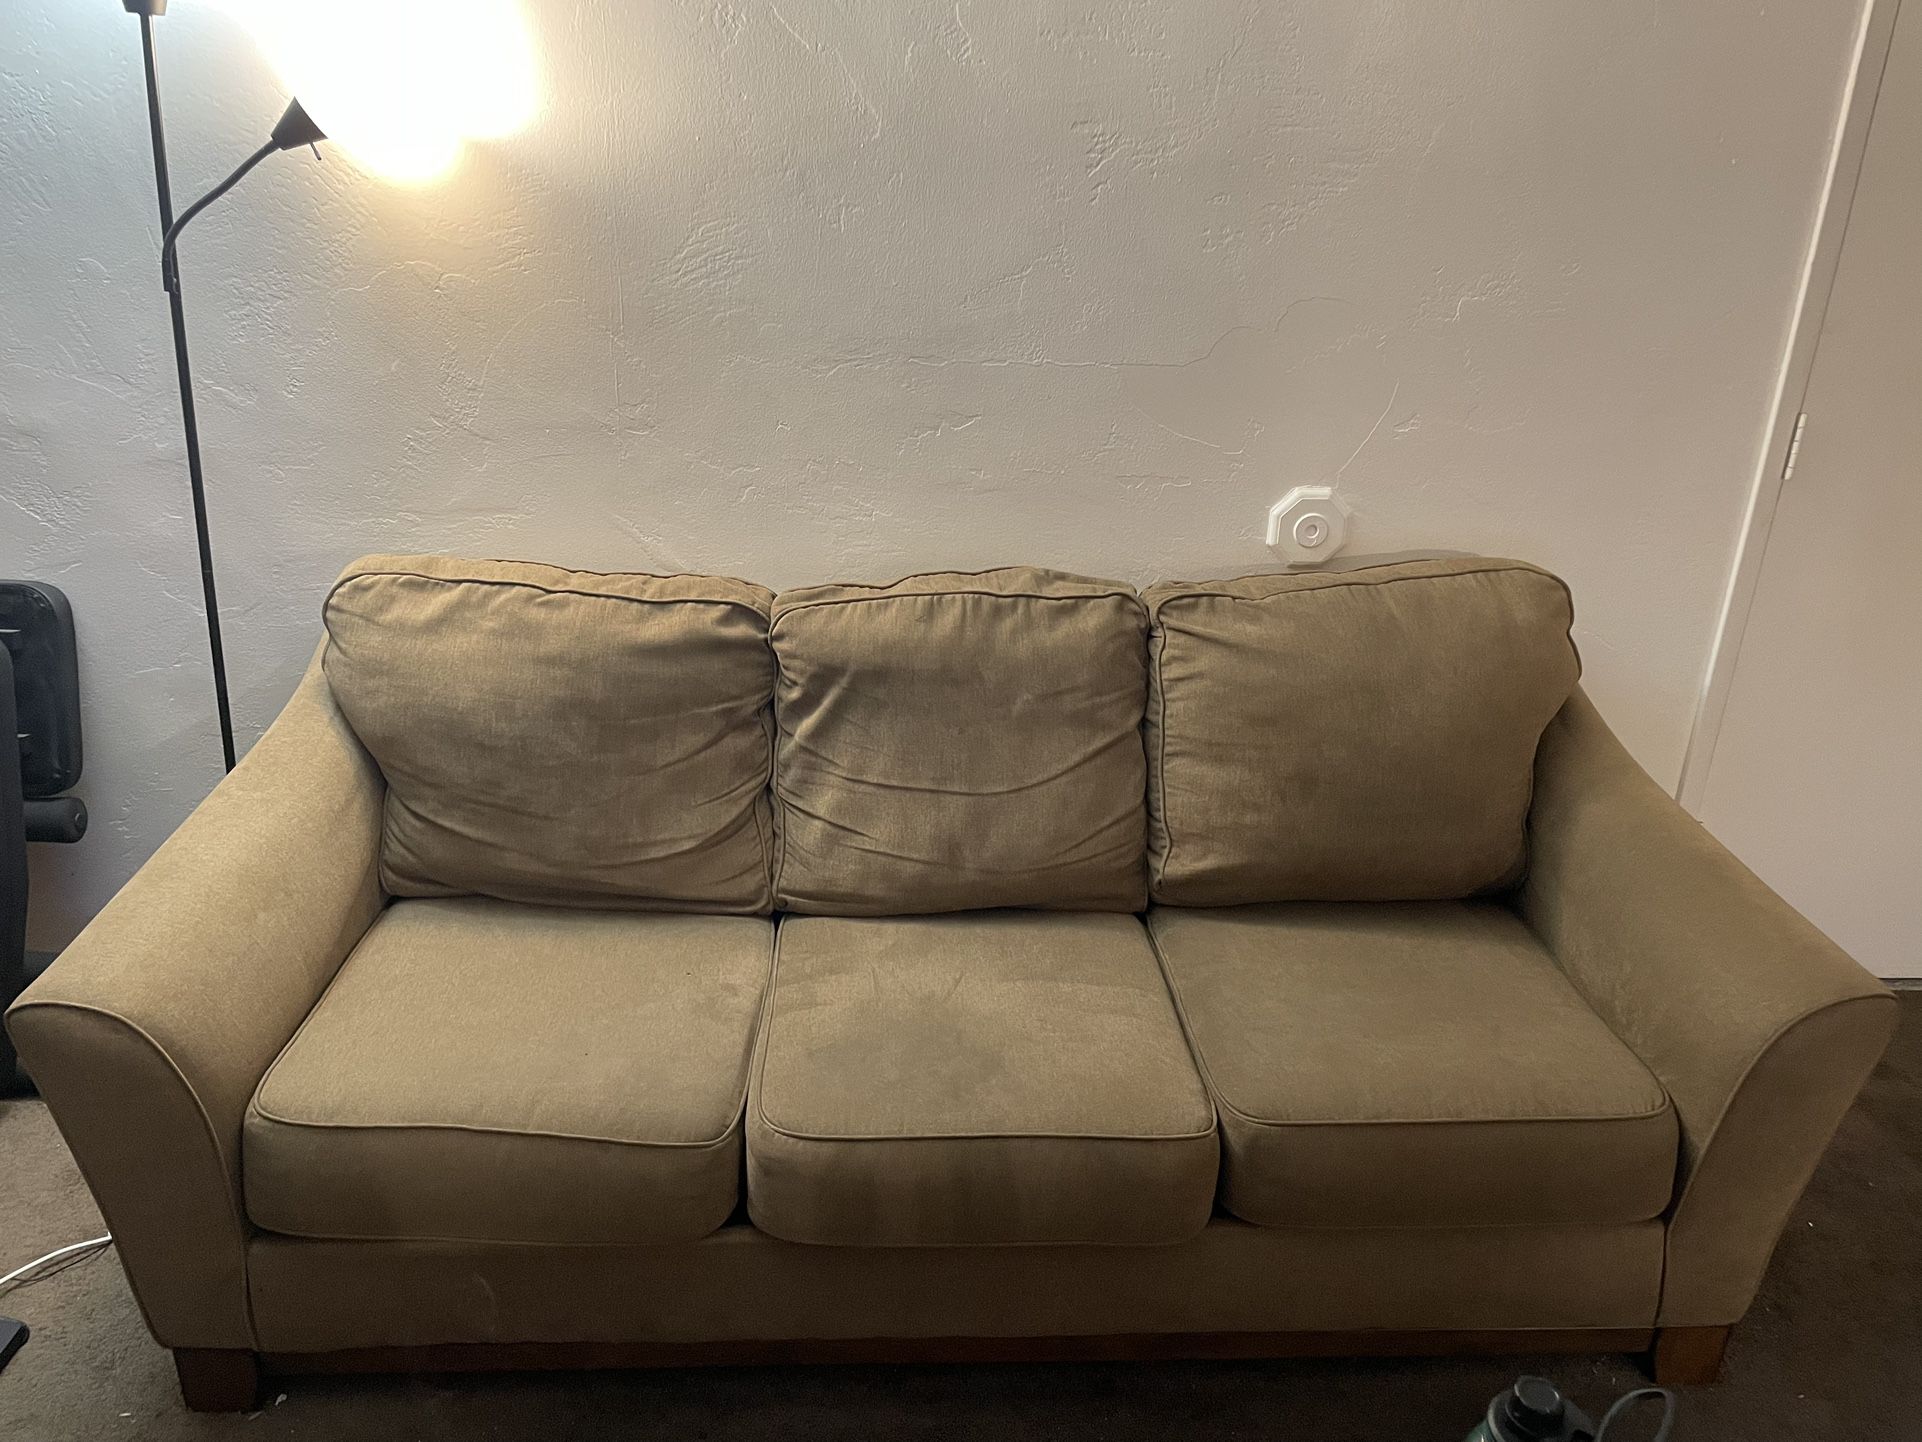 3 Seater Couch Or Sofa